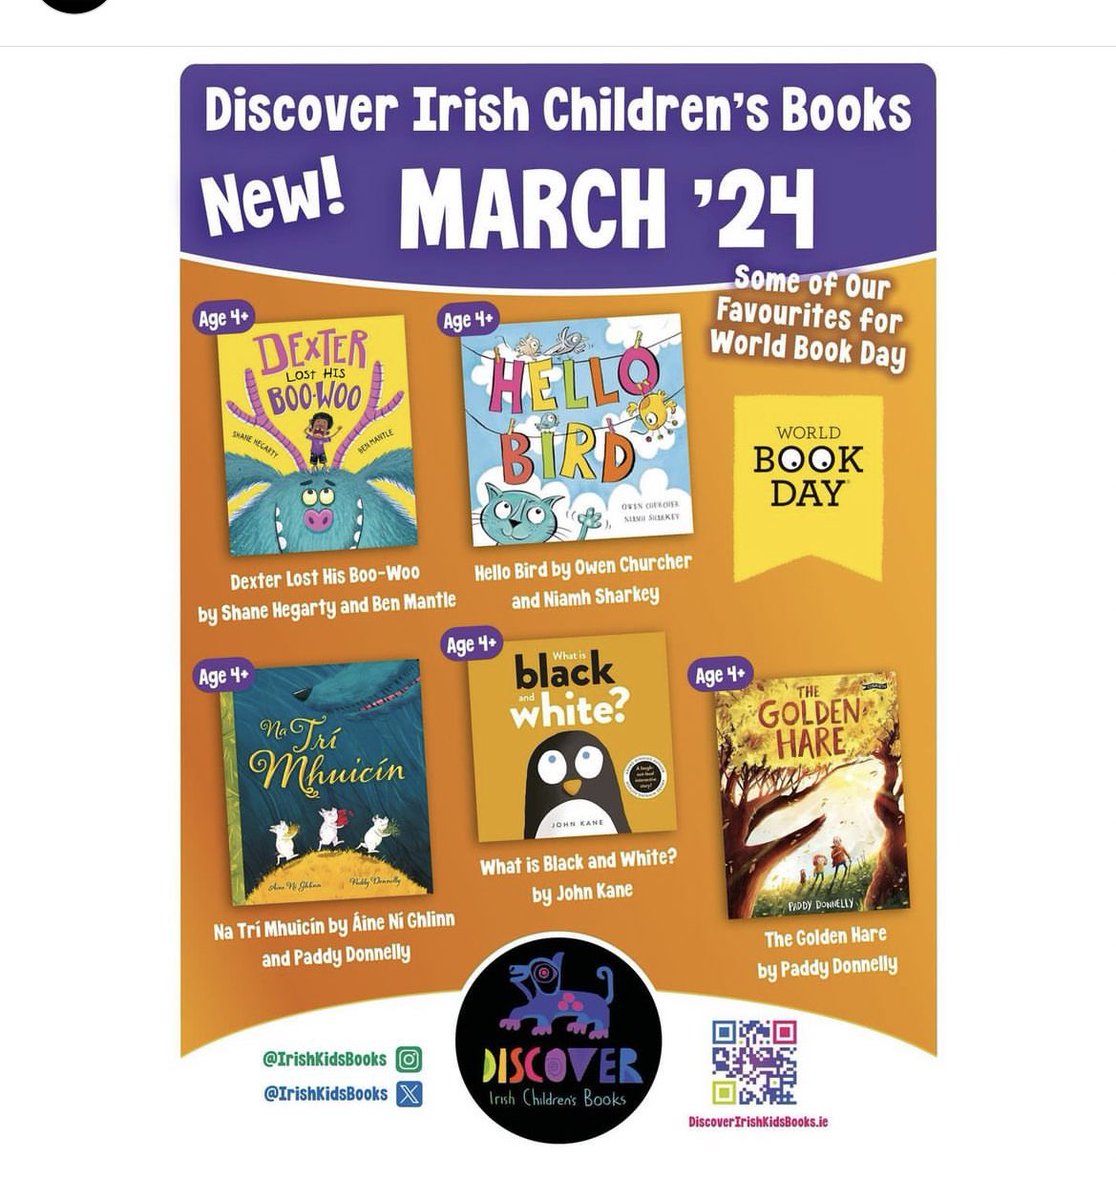 These graphics by @IrishKidsBooks are so helpful. I just checked in with my mom friends to ask them what books their kids were reading and many were UK authors. Now on a mission and have sent them loads of these so they can discover more Irish authors 🙂